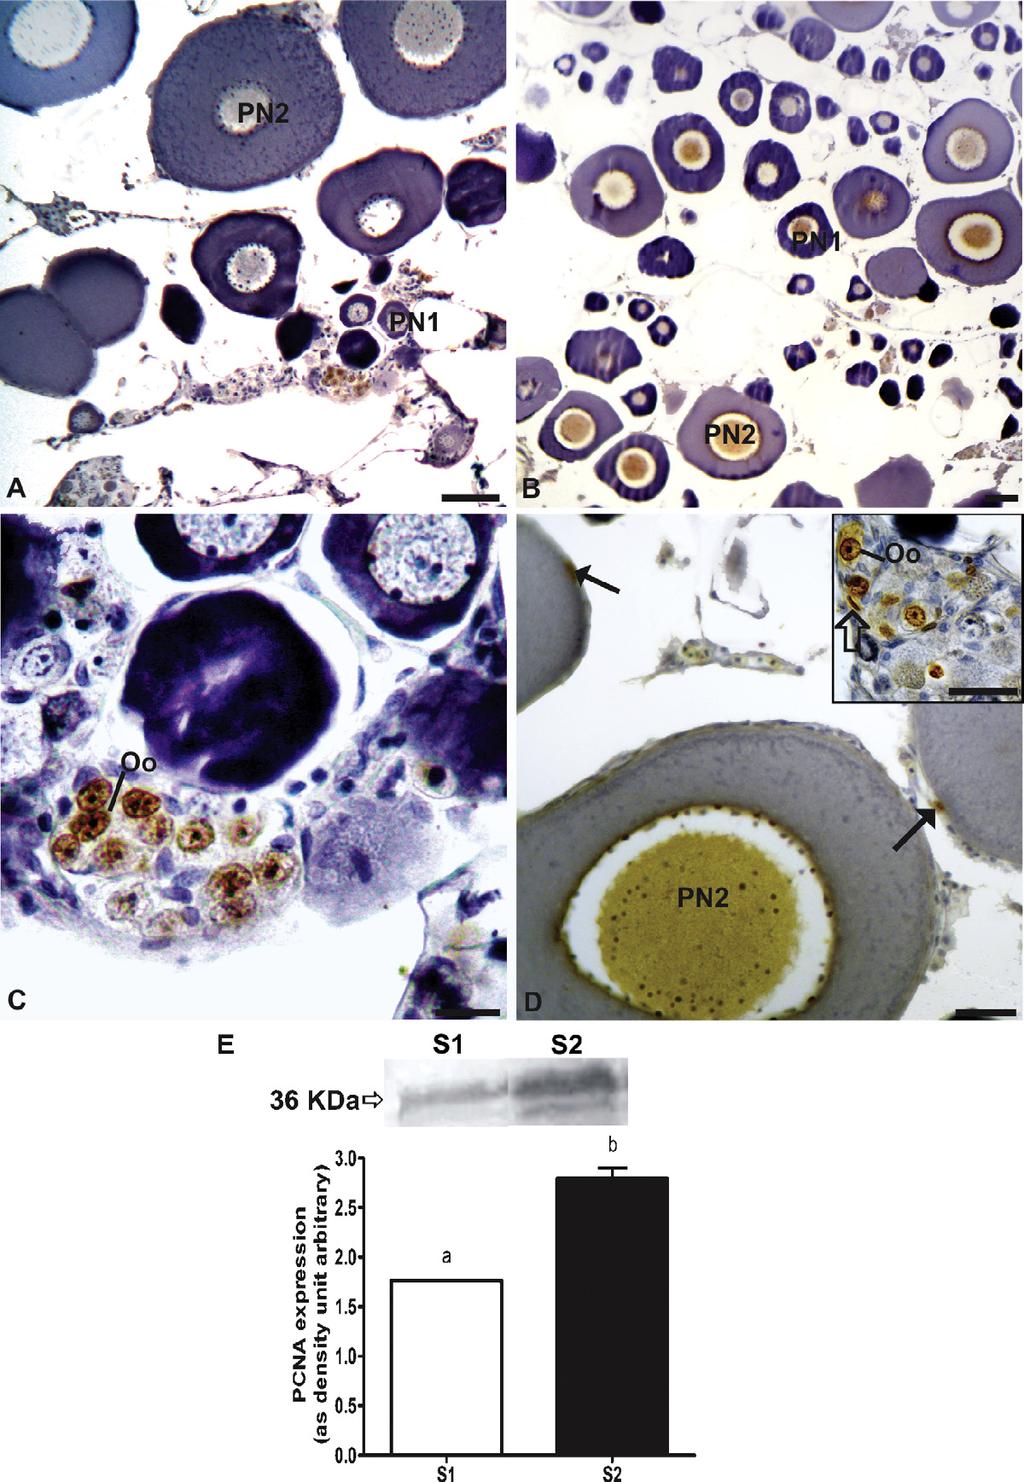 58 R.G. Thomé et al. / Tissue and Cell 44 (2012) 54 62 Fig. 3. Immunohistochemistry for PCNA in ovarian sections of the P.